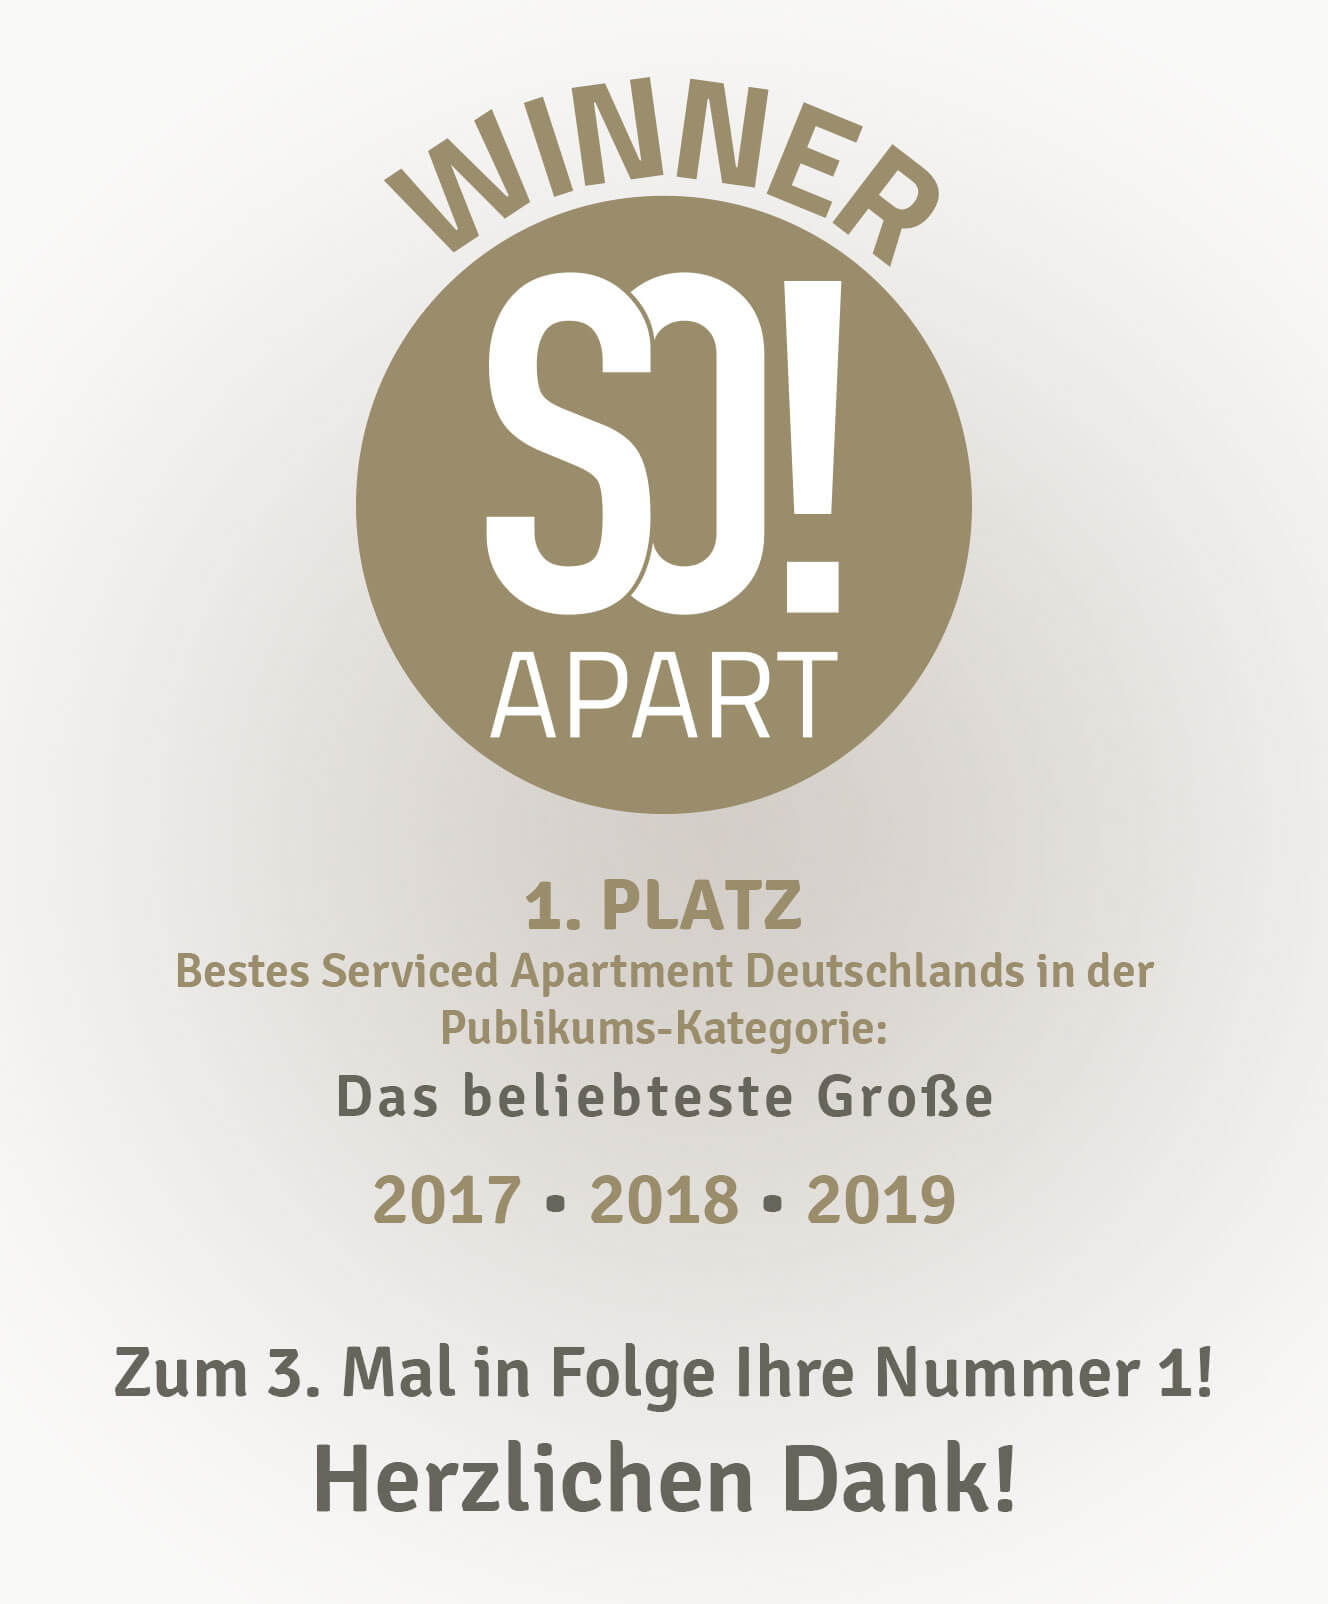 Most loved Serviced Apartment in germany - 1st place SO!Apart 2017 2018 2019 